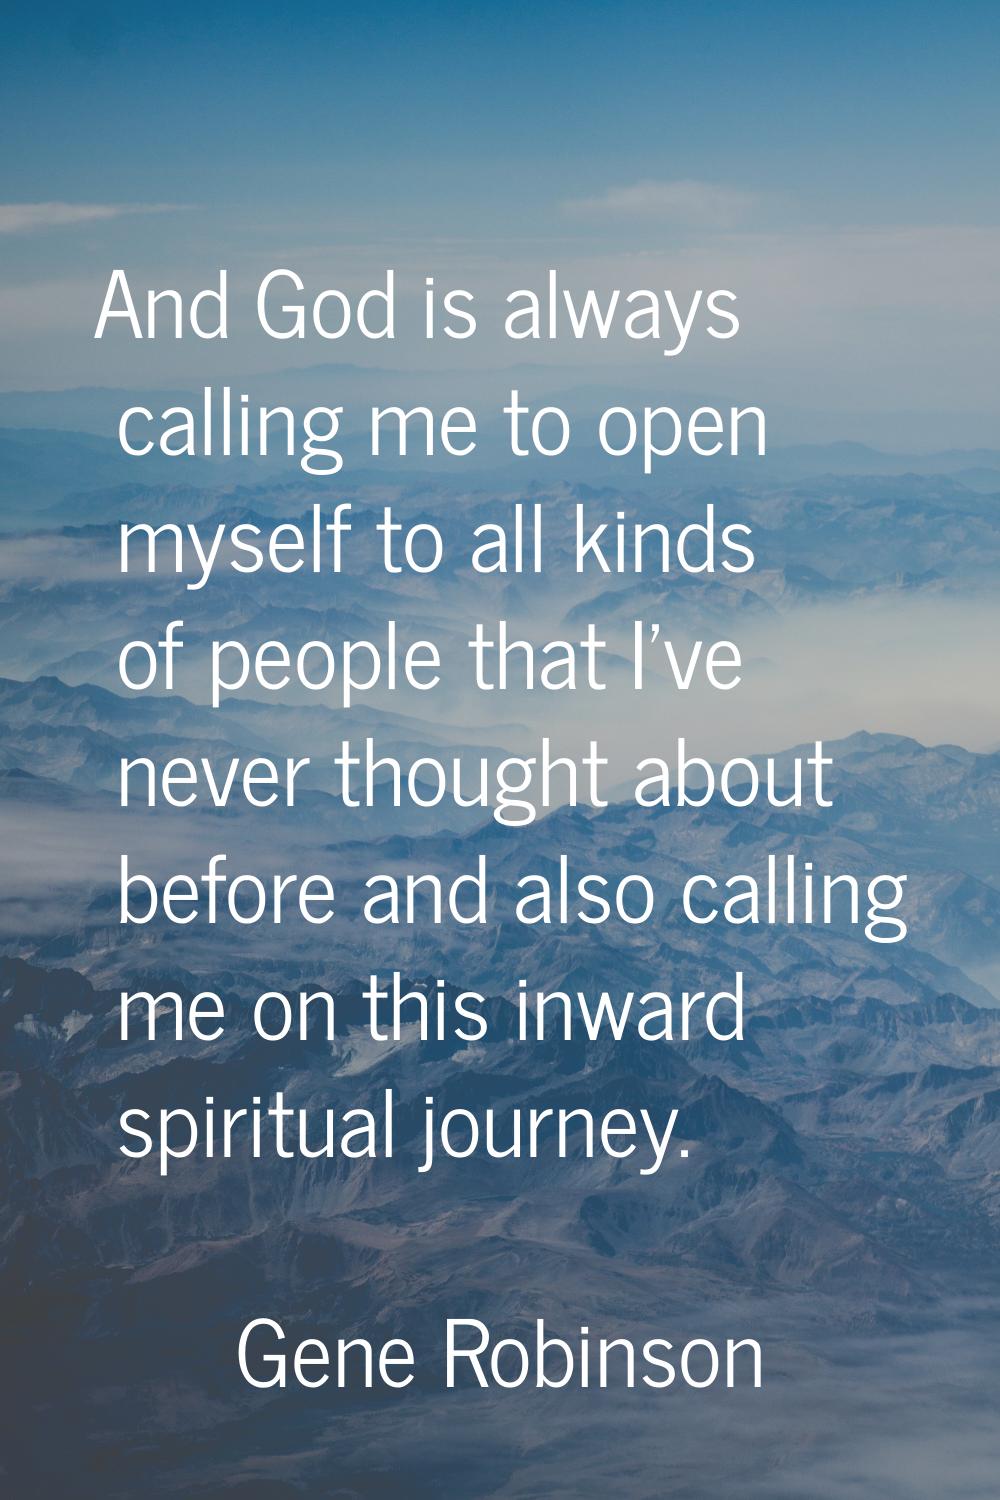 And God is always calling me to open myself to all kinds of people that I've never thought about be